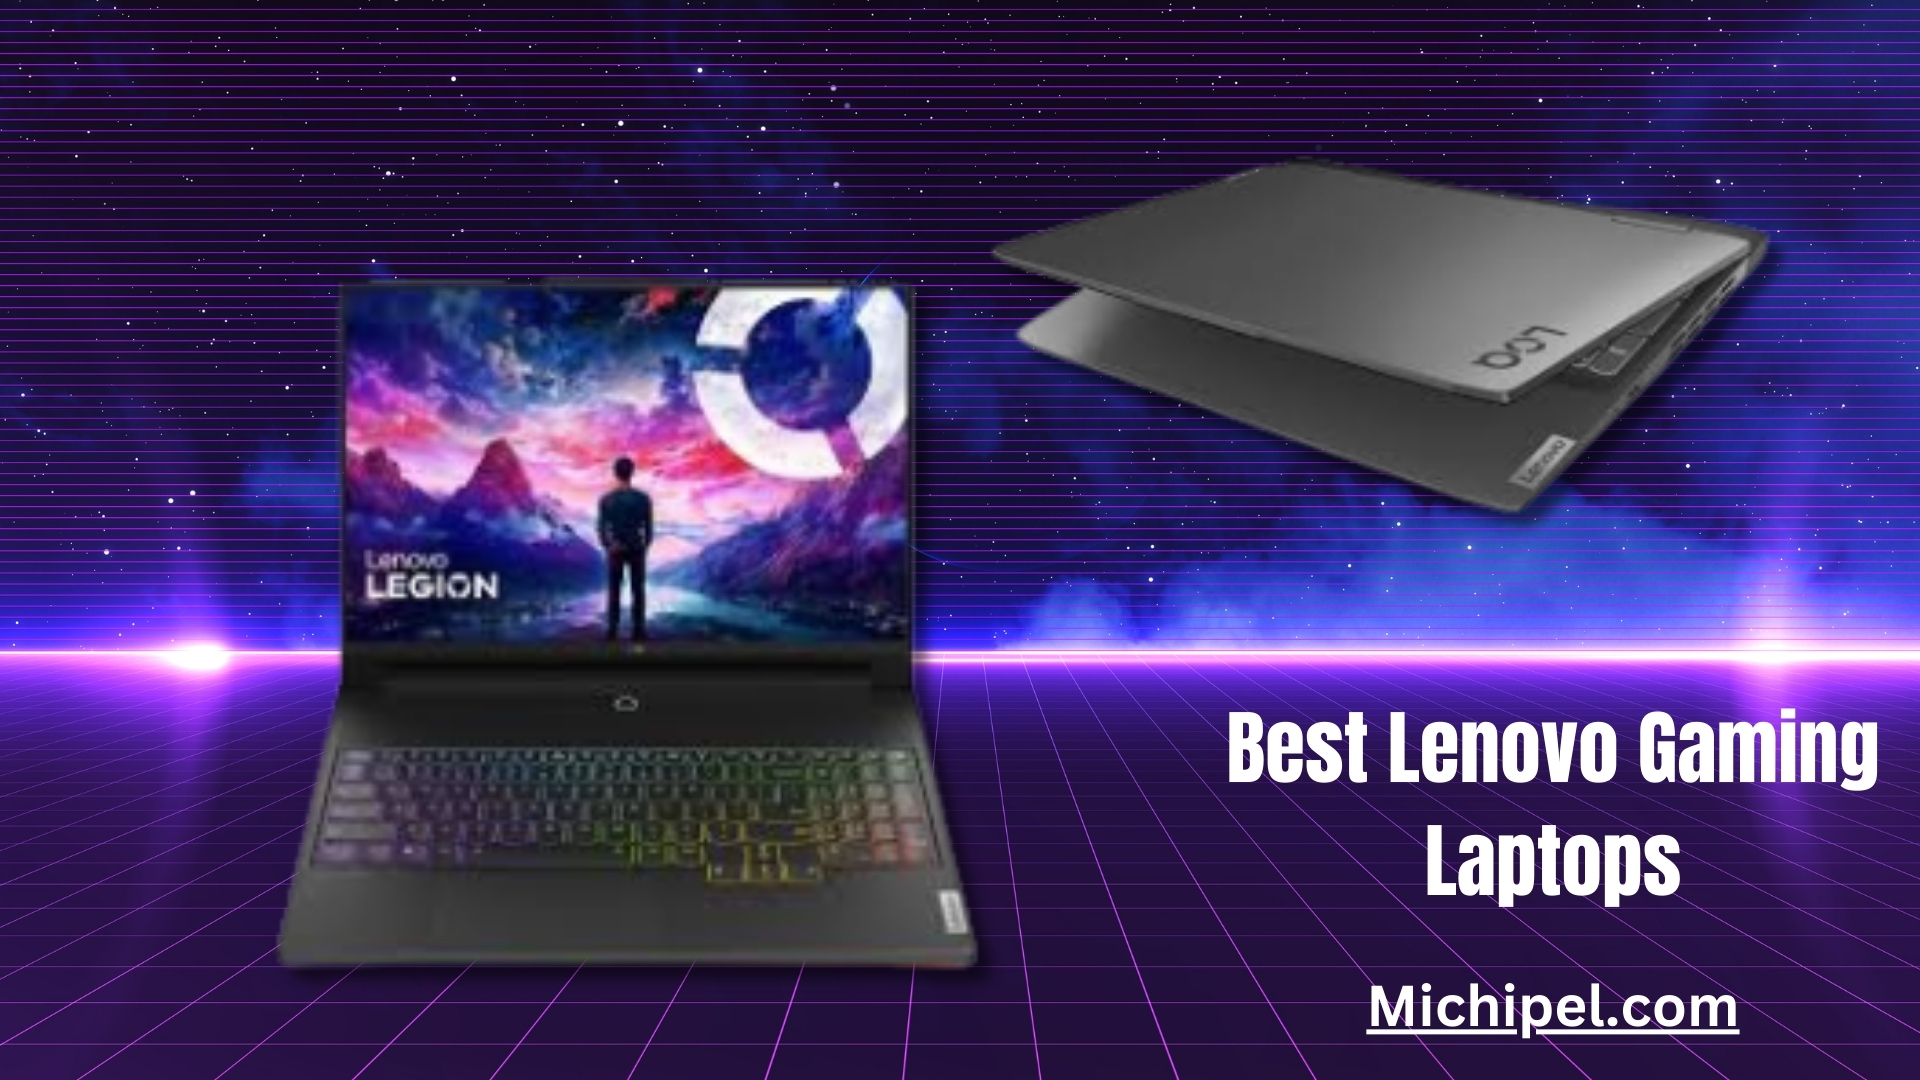 Best Lenovo gaming laptops: The gamer’s guide to finding the perfect rig